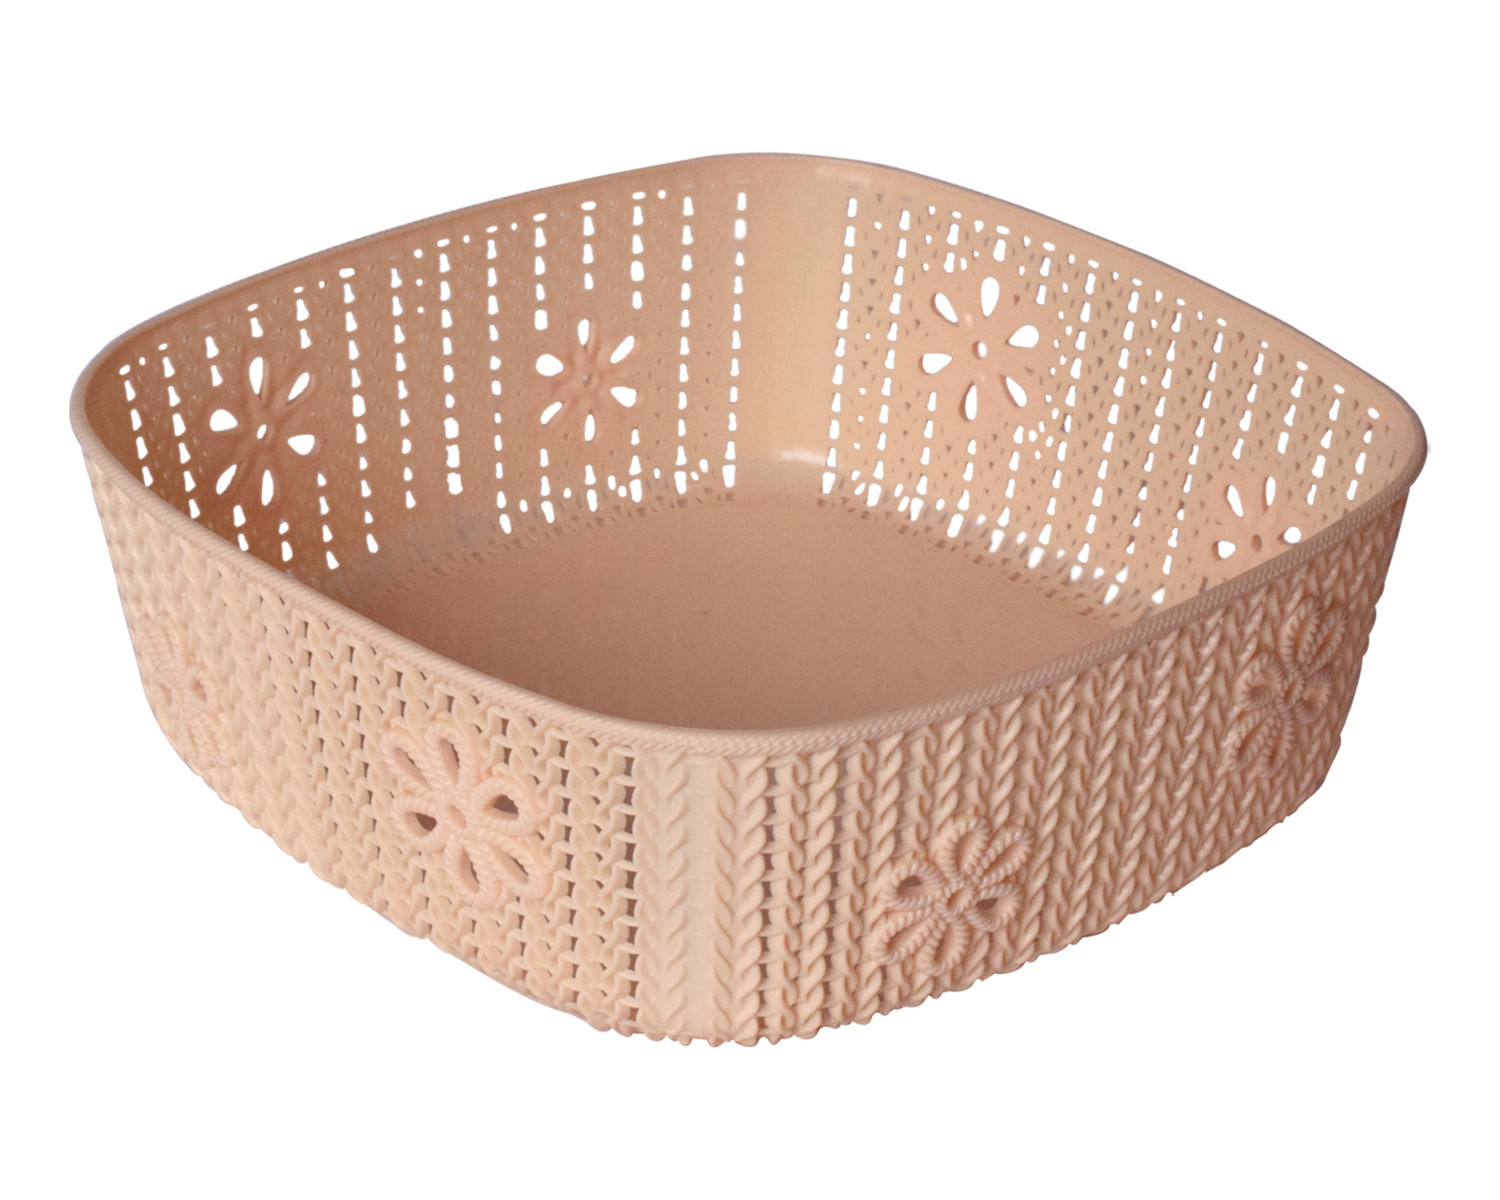 Kuber Industries Woven Design Multipurpose Square Shape Basket Ideal for Friuts, Vegetable, Toys Small, Medium, Large Pack of 3 (Light Brown)